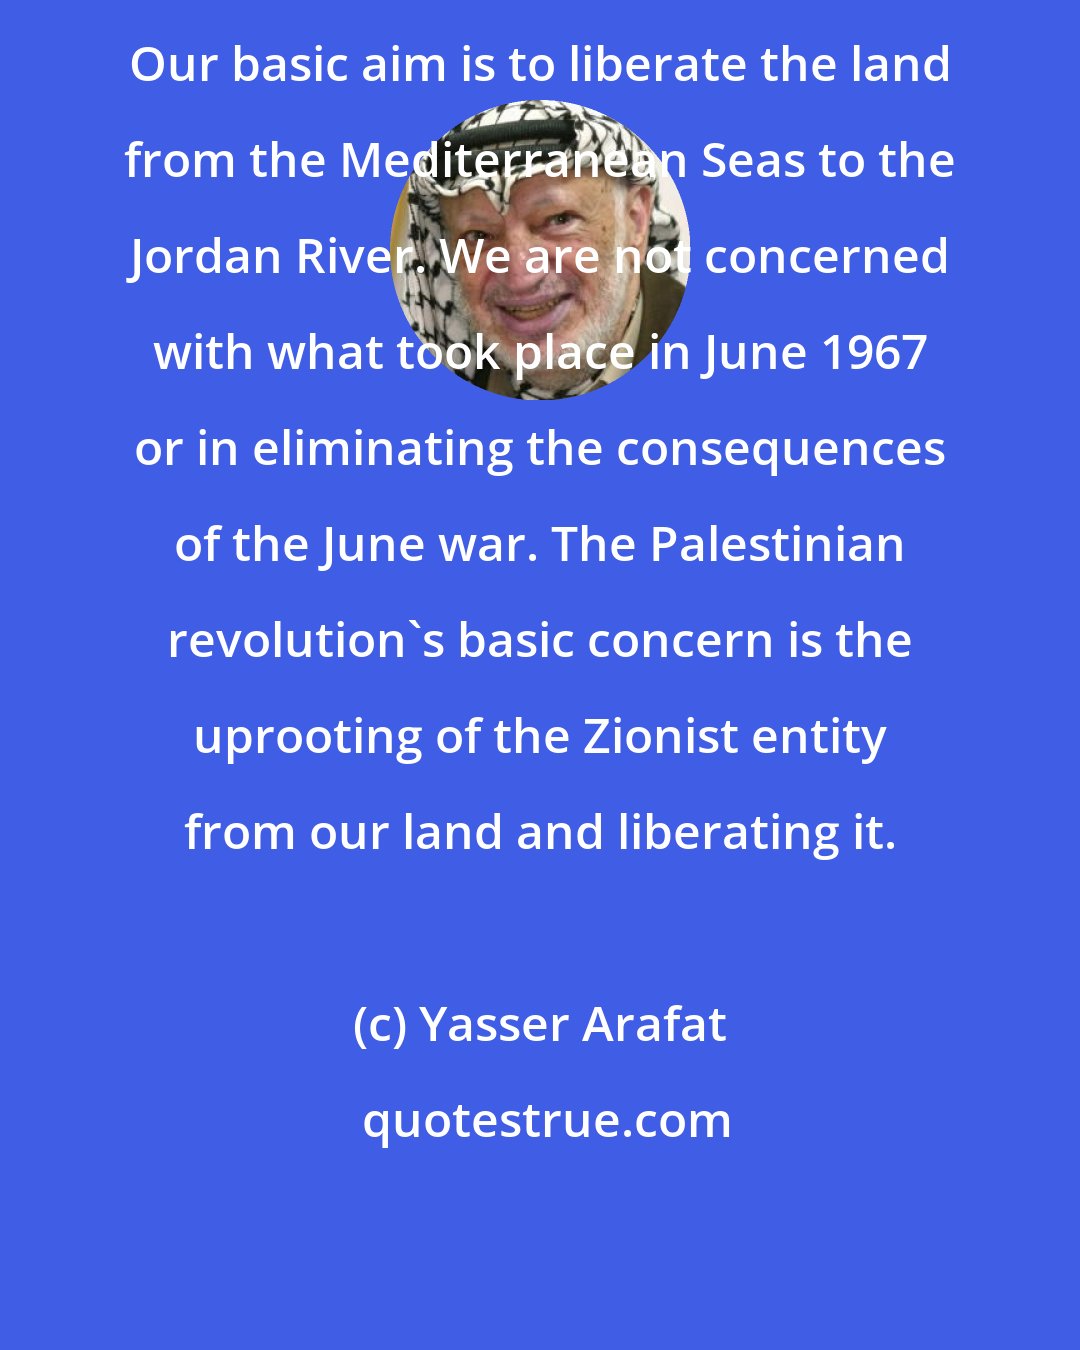 Yasser Arafat: Our basic aim is to liberate the land from the Mediterranean Seas to the Jordan River. We are not concerned with what took place in June 1967 or in eliminating the consequences of the June war. The Palestinian revolution's basic concern is the uprooting of the Zionist entity from our land and liberating it.